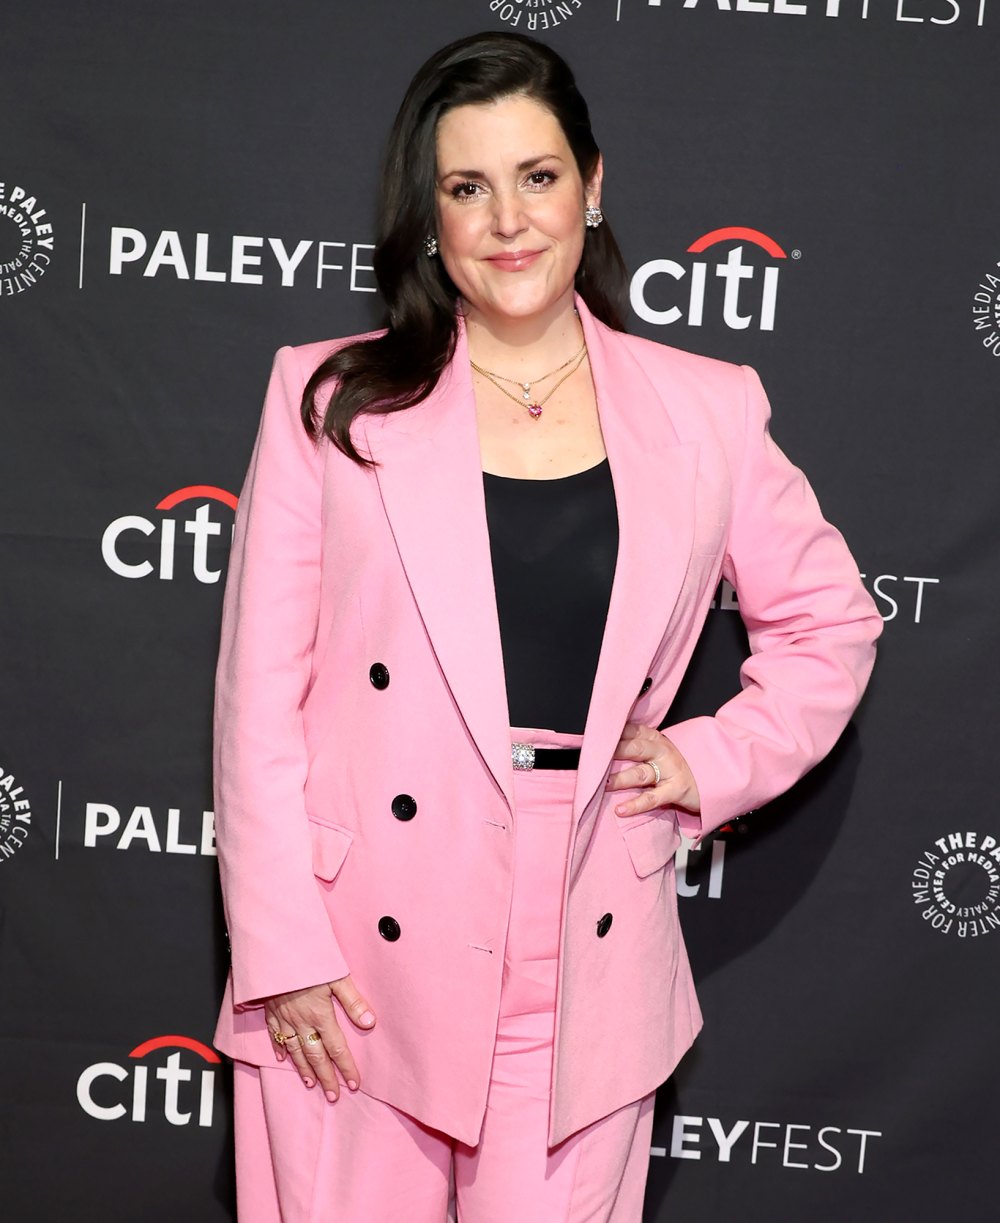 Melanie Lynskey Debuts ‘Adorable’ Tattoo of 5-Year-Old Daughter’s Drawing: ‘Fills Me With Deep Gratitude’